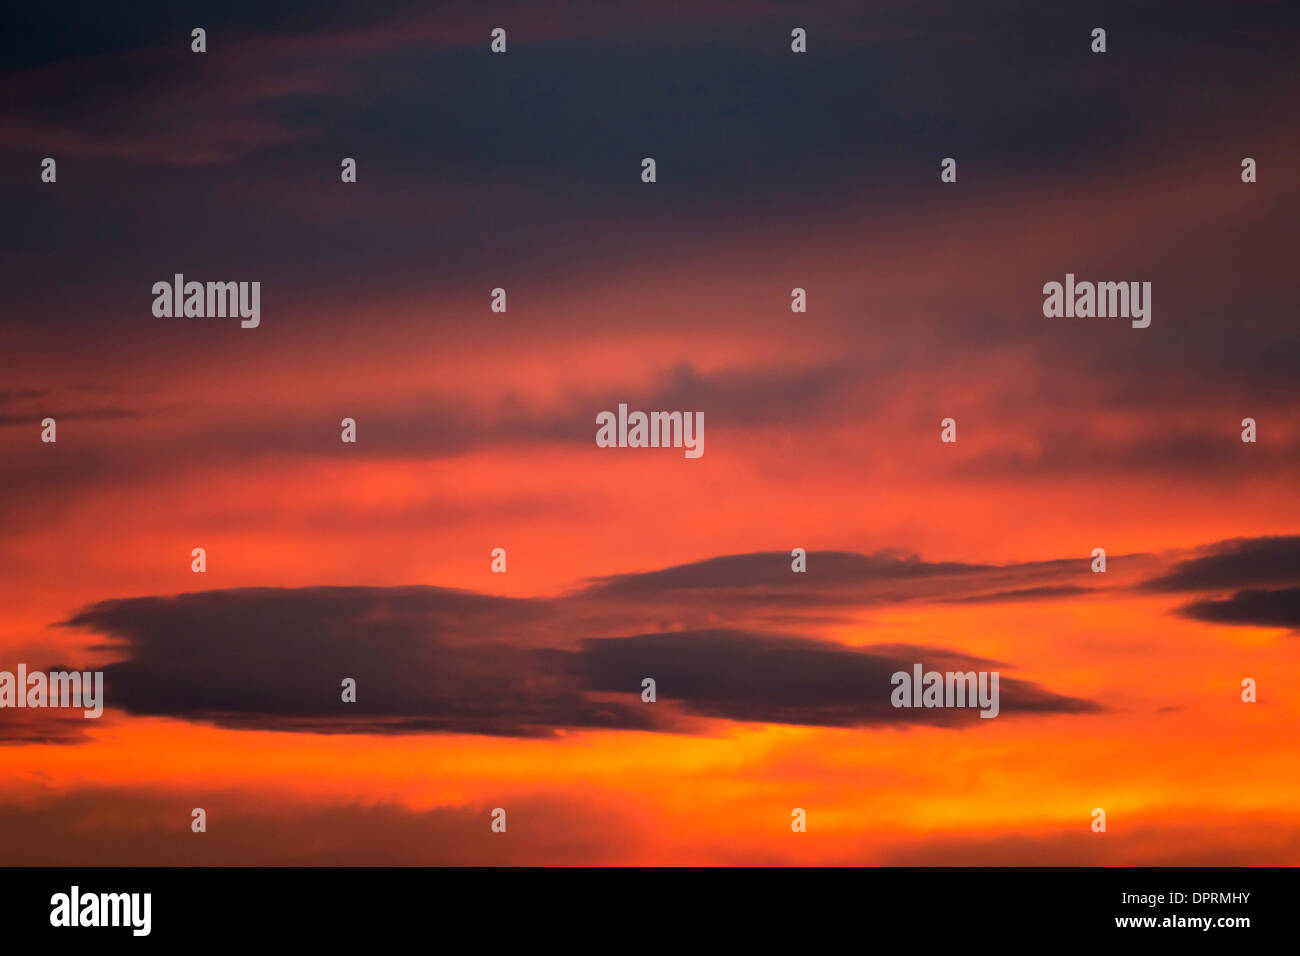 dark cloud on red sky - gloaming - sunset colors Stock Photo